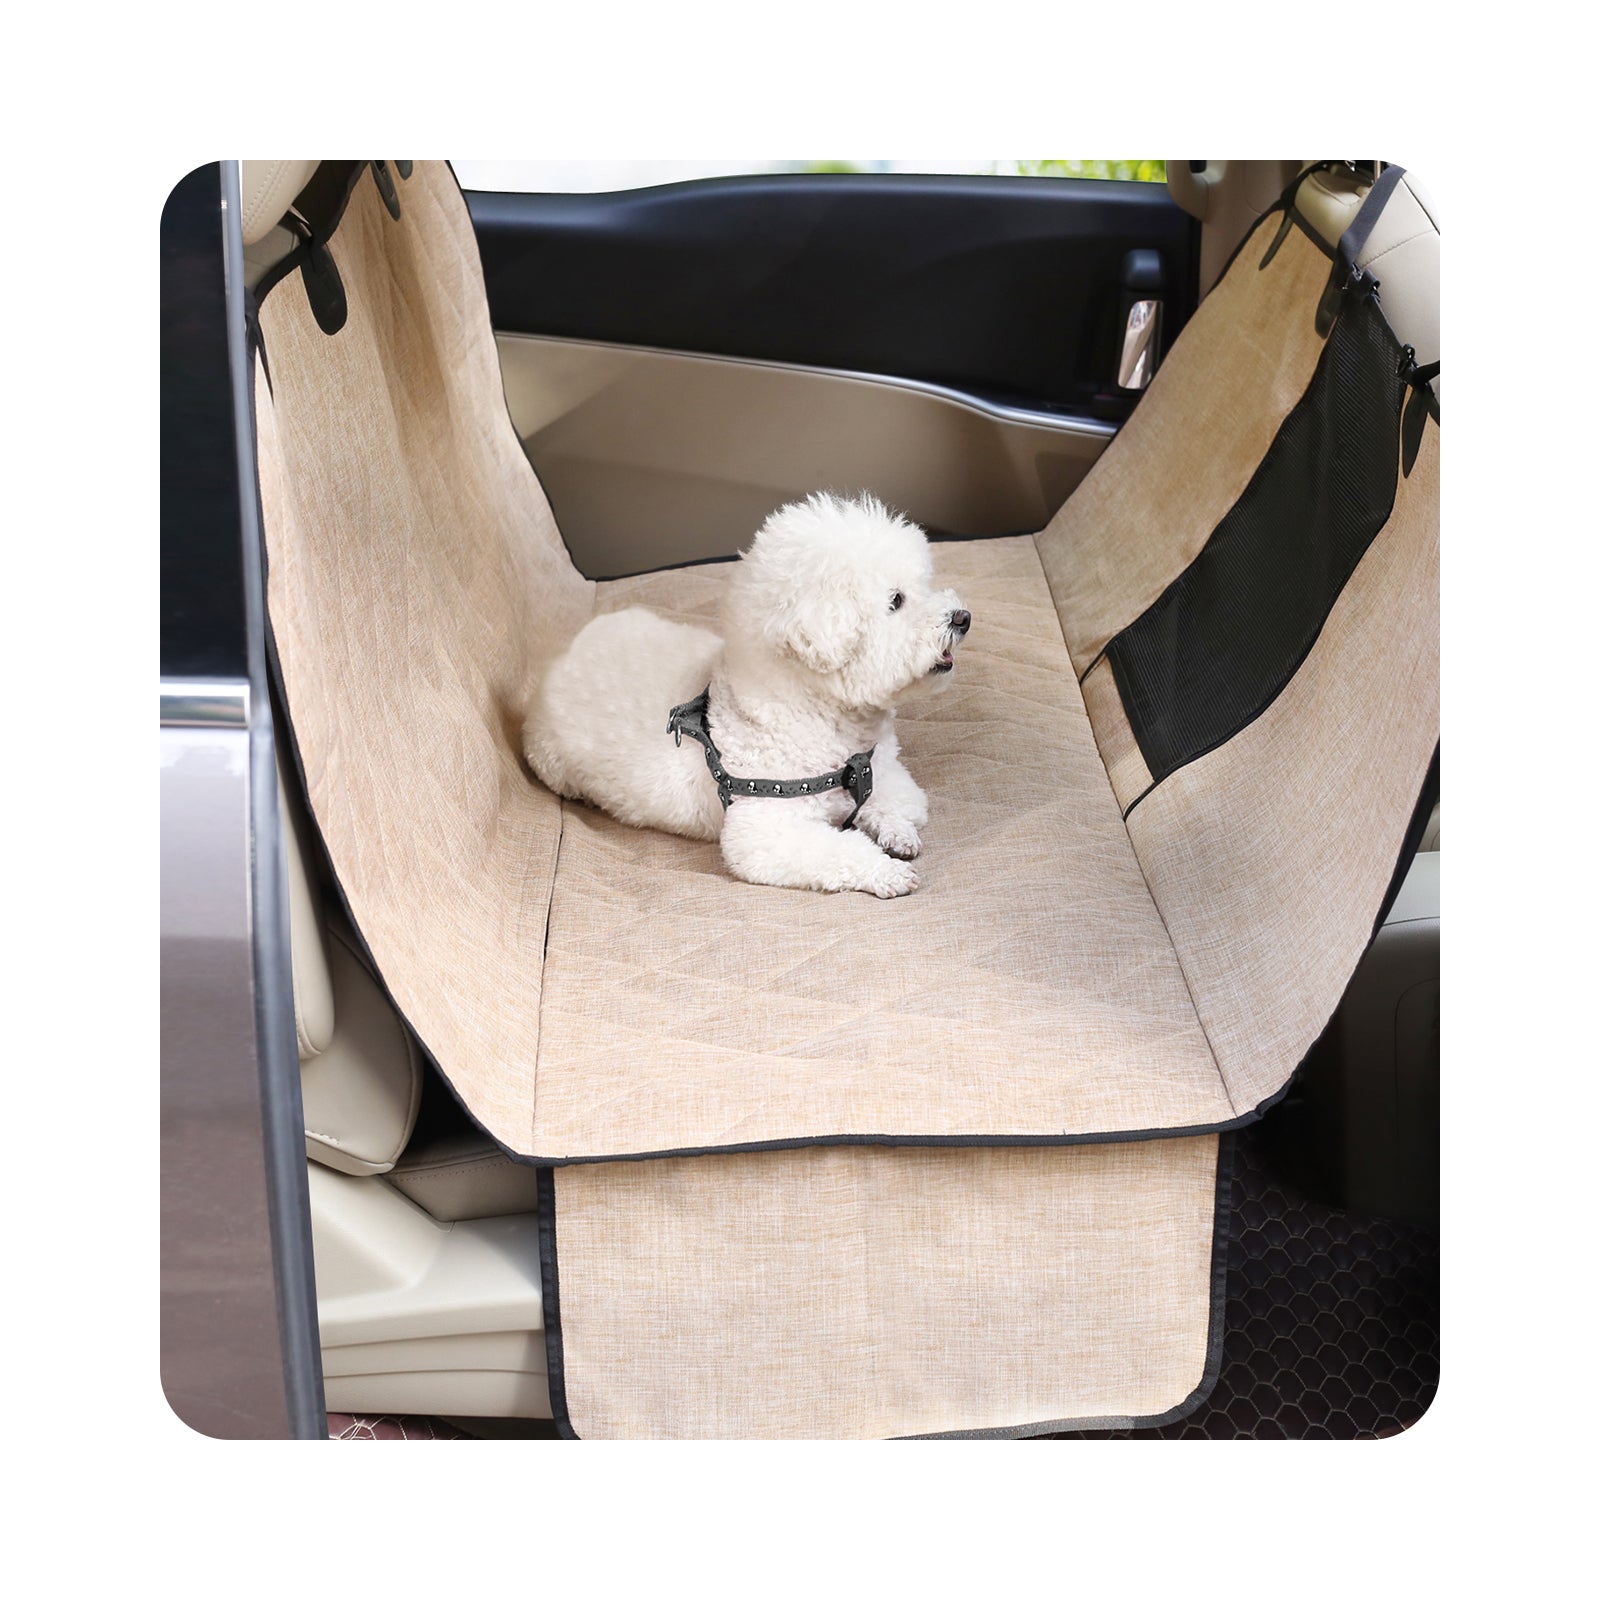 Vivaglory Dog Seat Covers, Mesh Visual Window with Extra Strap & Buckl –  VIVAGLORY